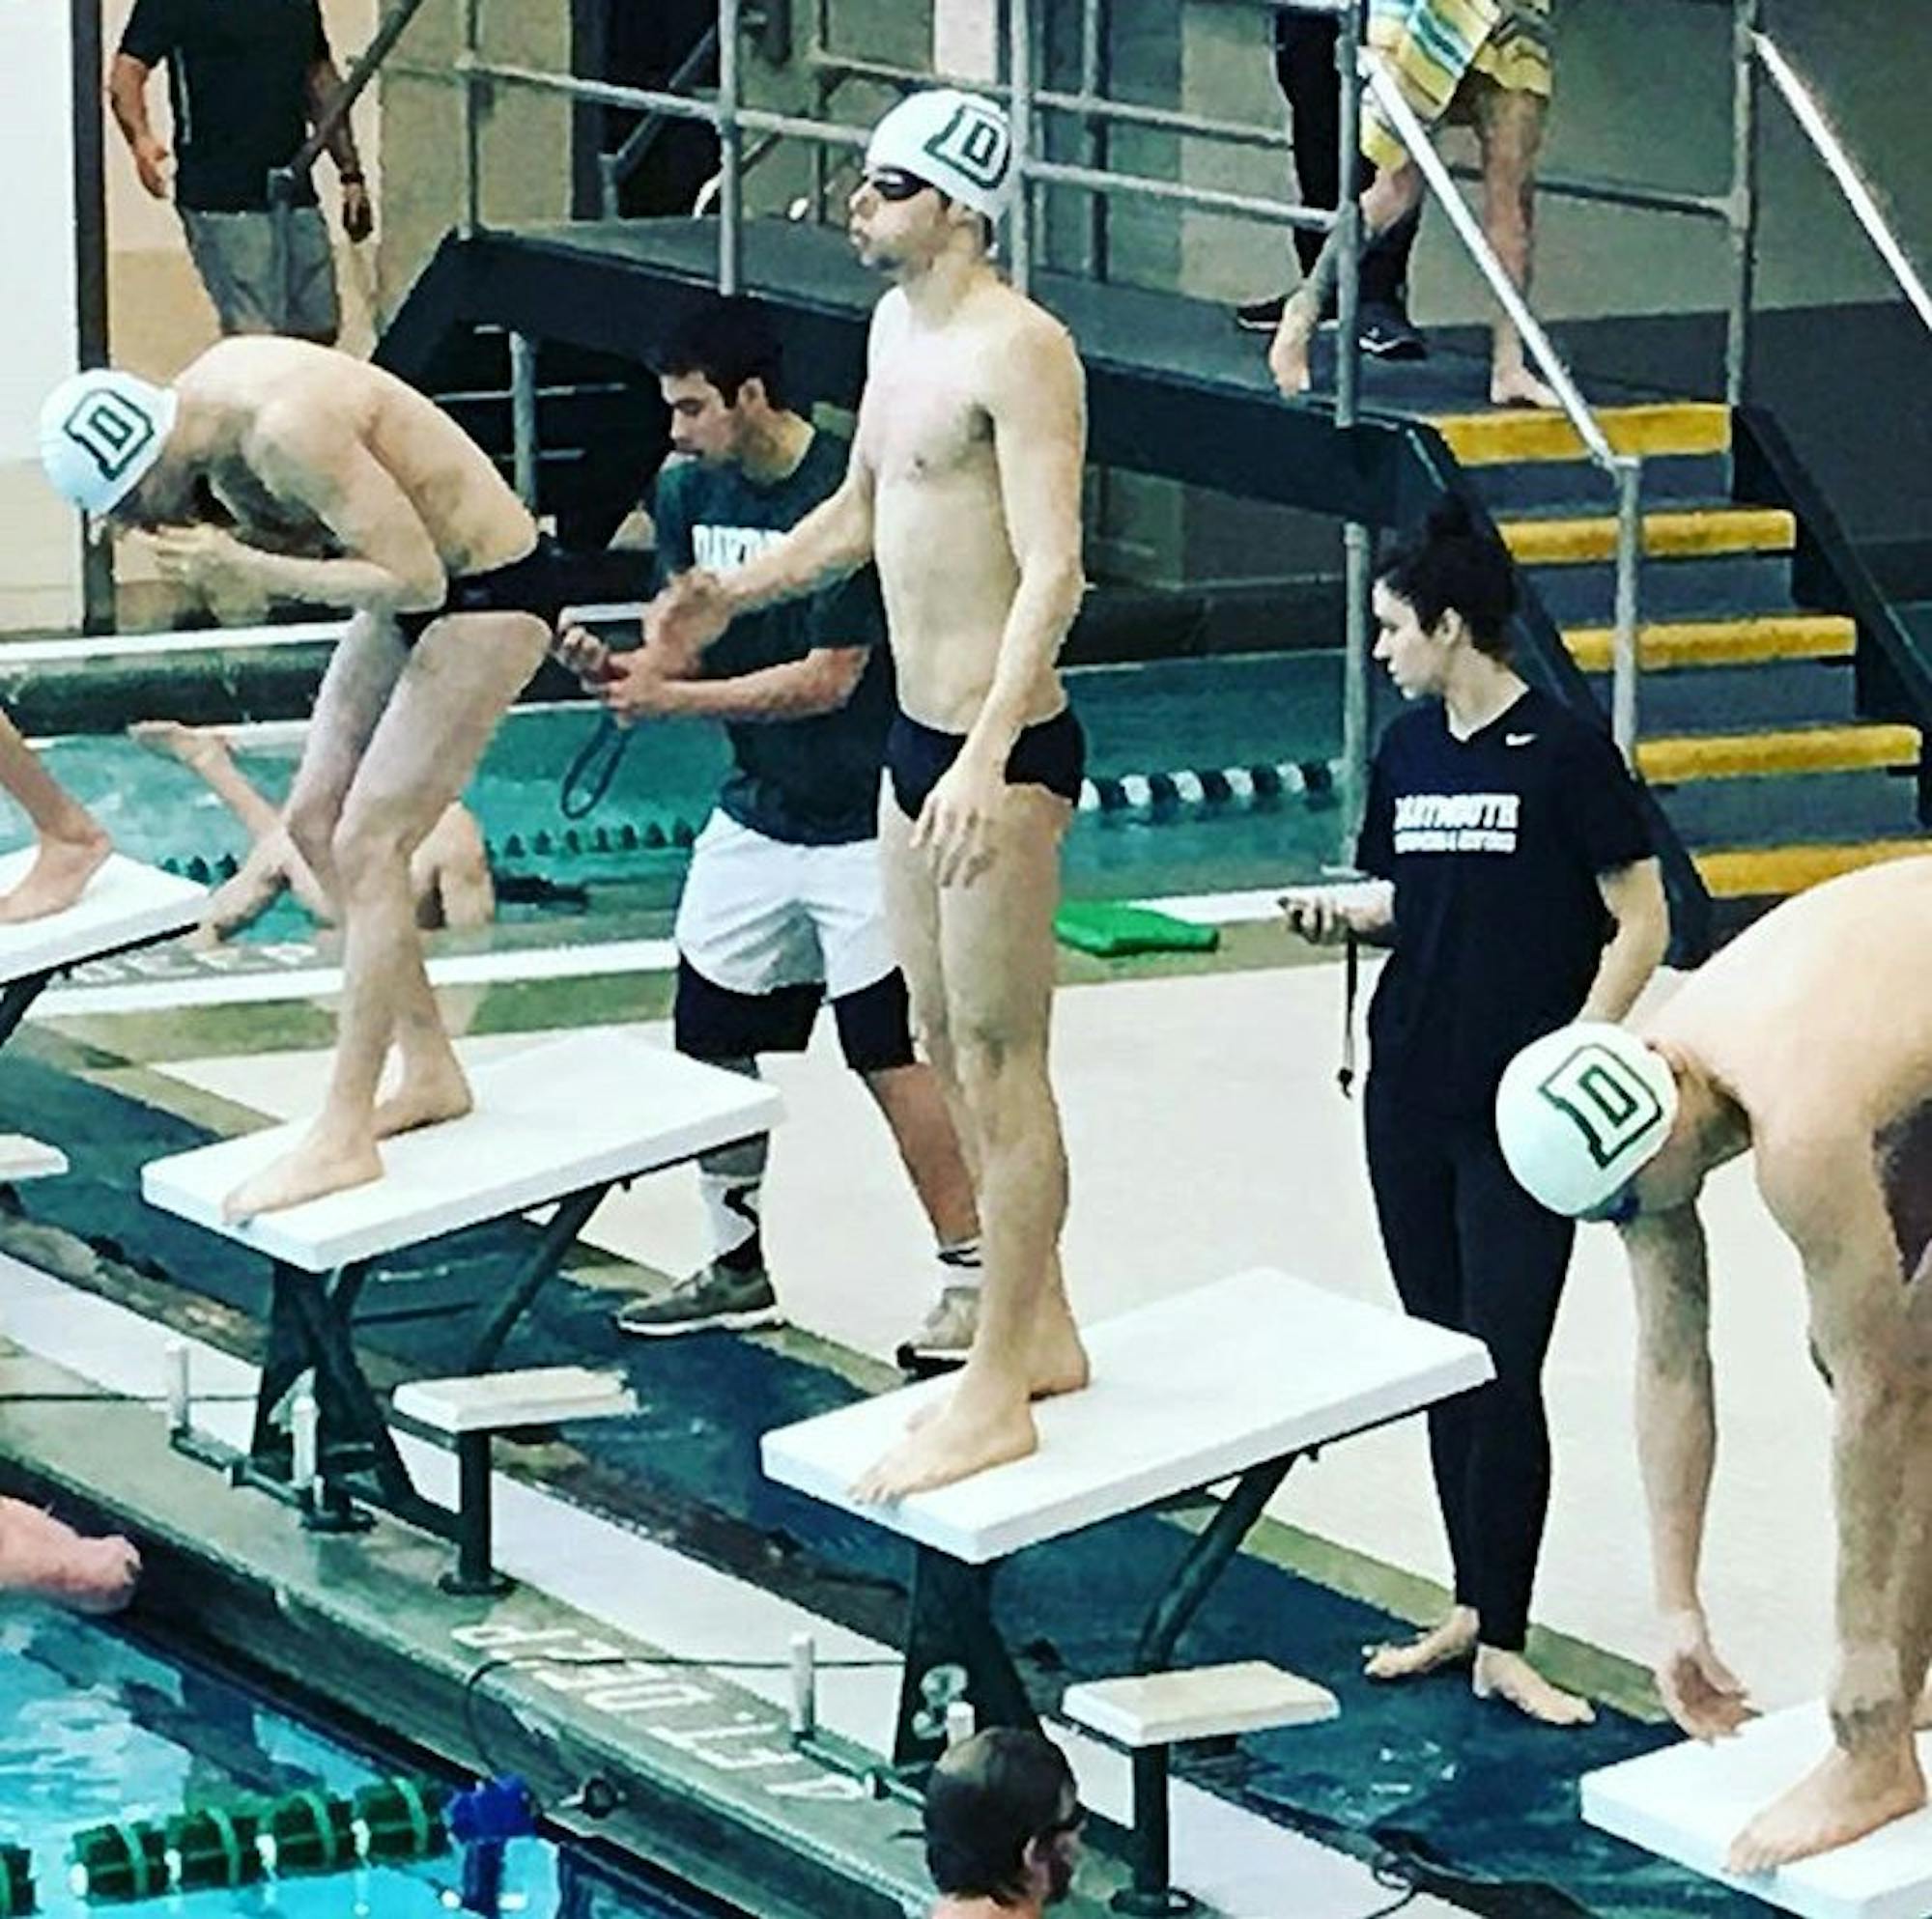 Connor LaMastra ’21 takes a deep breath on the starting block before a race.